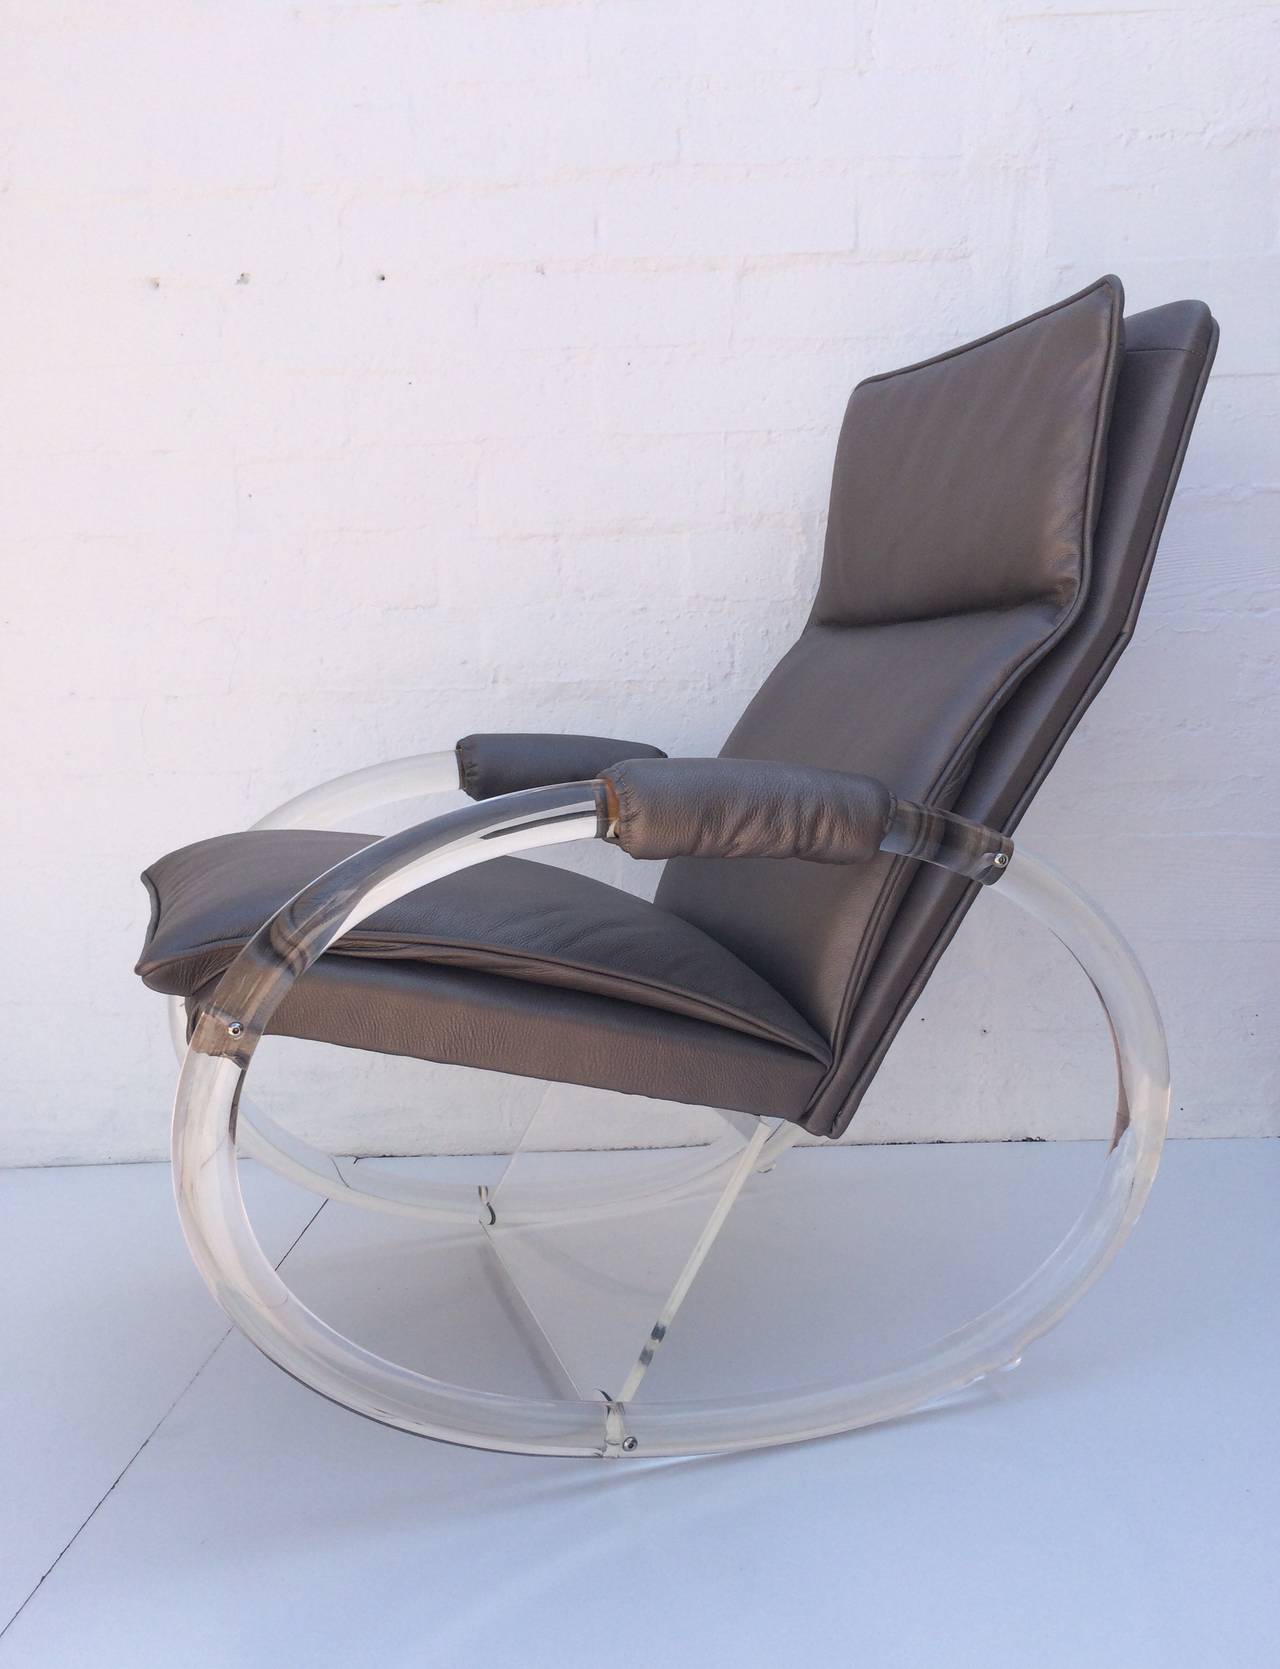 An iconic acrylic rocking chair designed by Charles Hollis Jones, circa 1970s. 
Newly reupholstered in a soft gray leather and newly professionally polished.